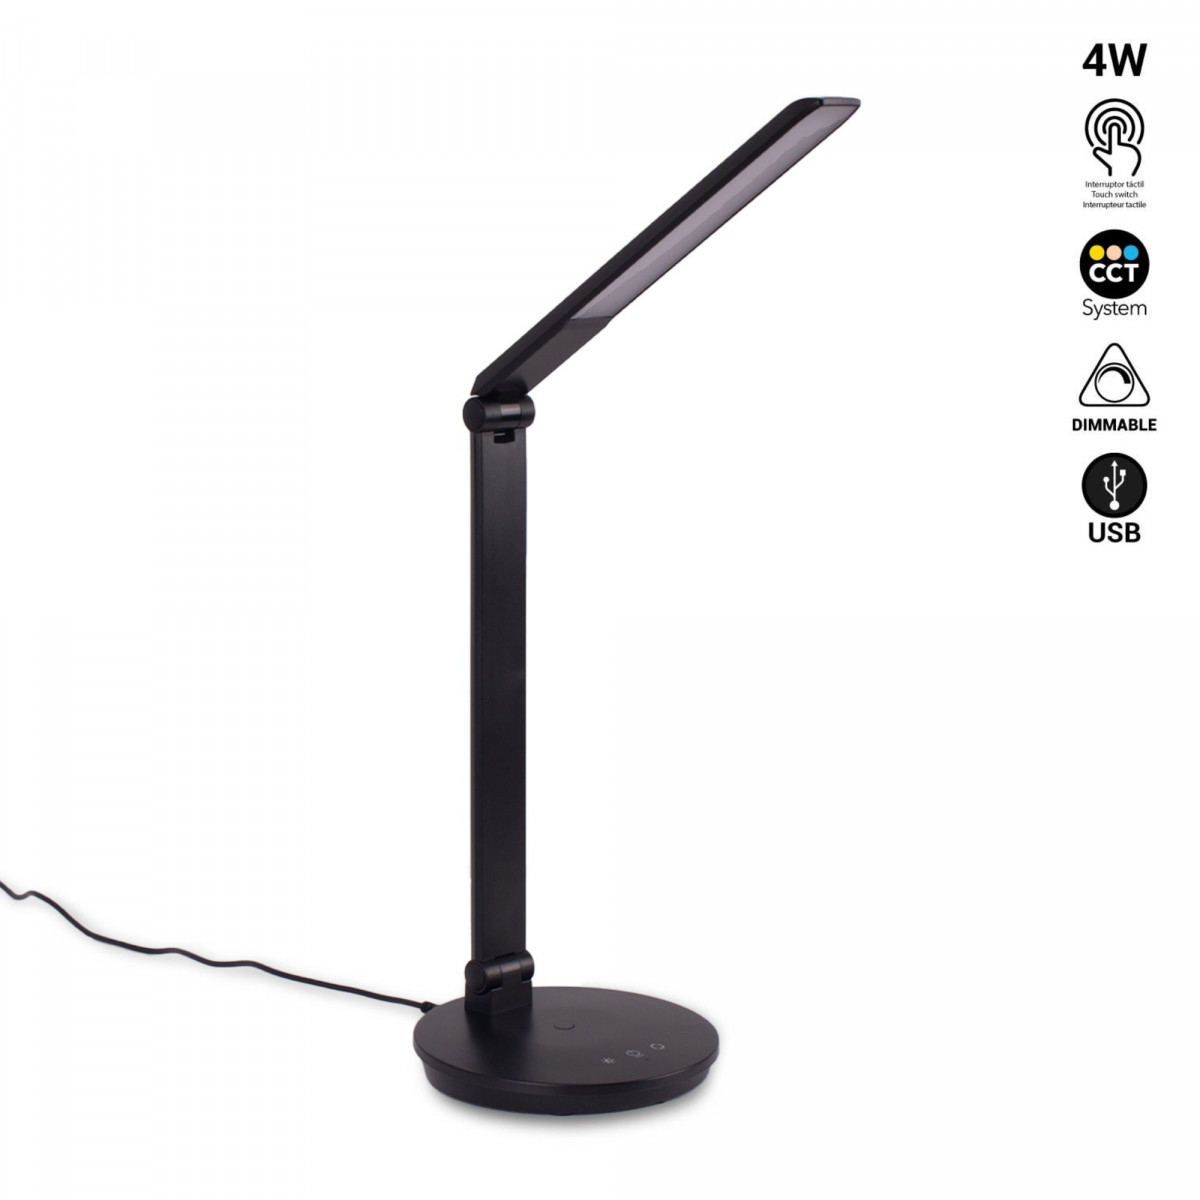 LED Desk Lamp with USB - Dimmable - CCT - 4W